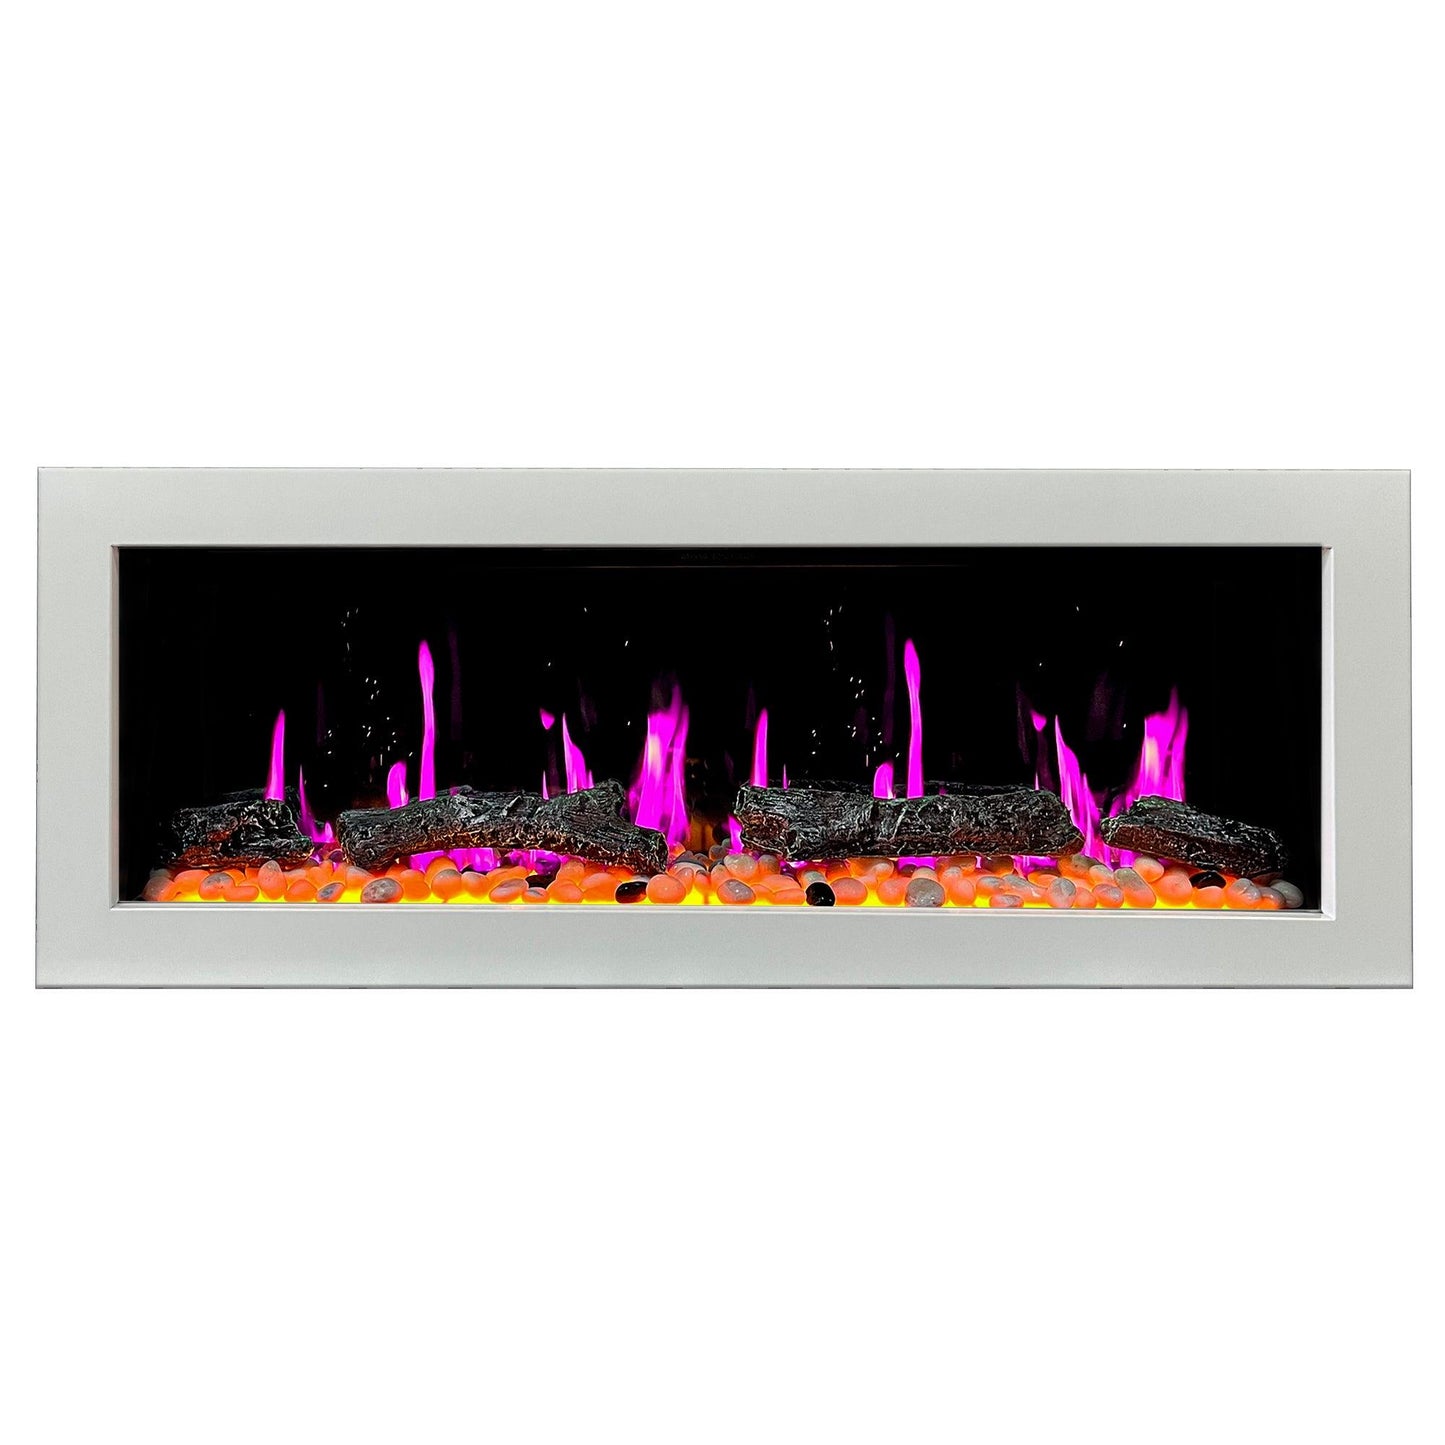 ZopaFlame™ 47" Linear Wall-mount Electric Fireplace - WP17488X - ZopaFlame Fireplaces